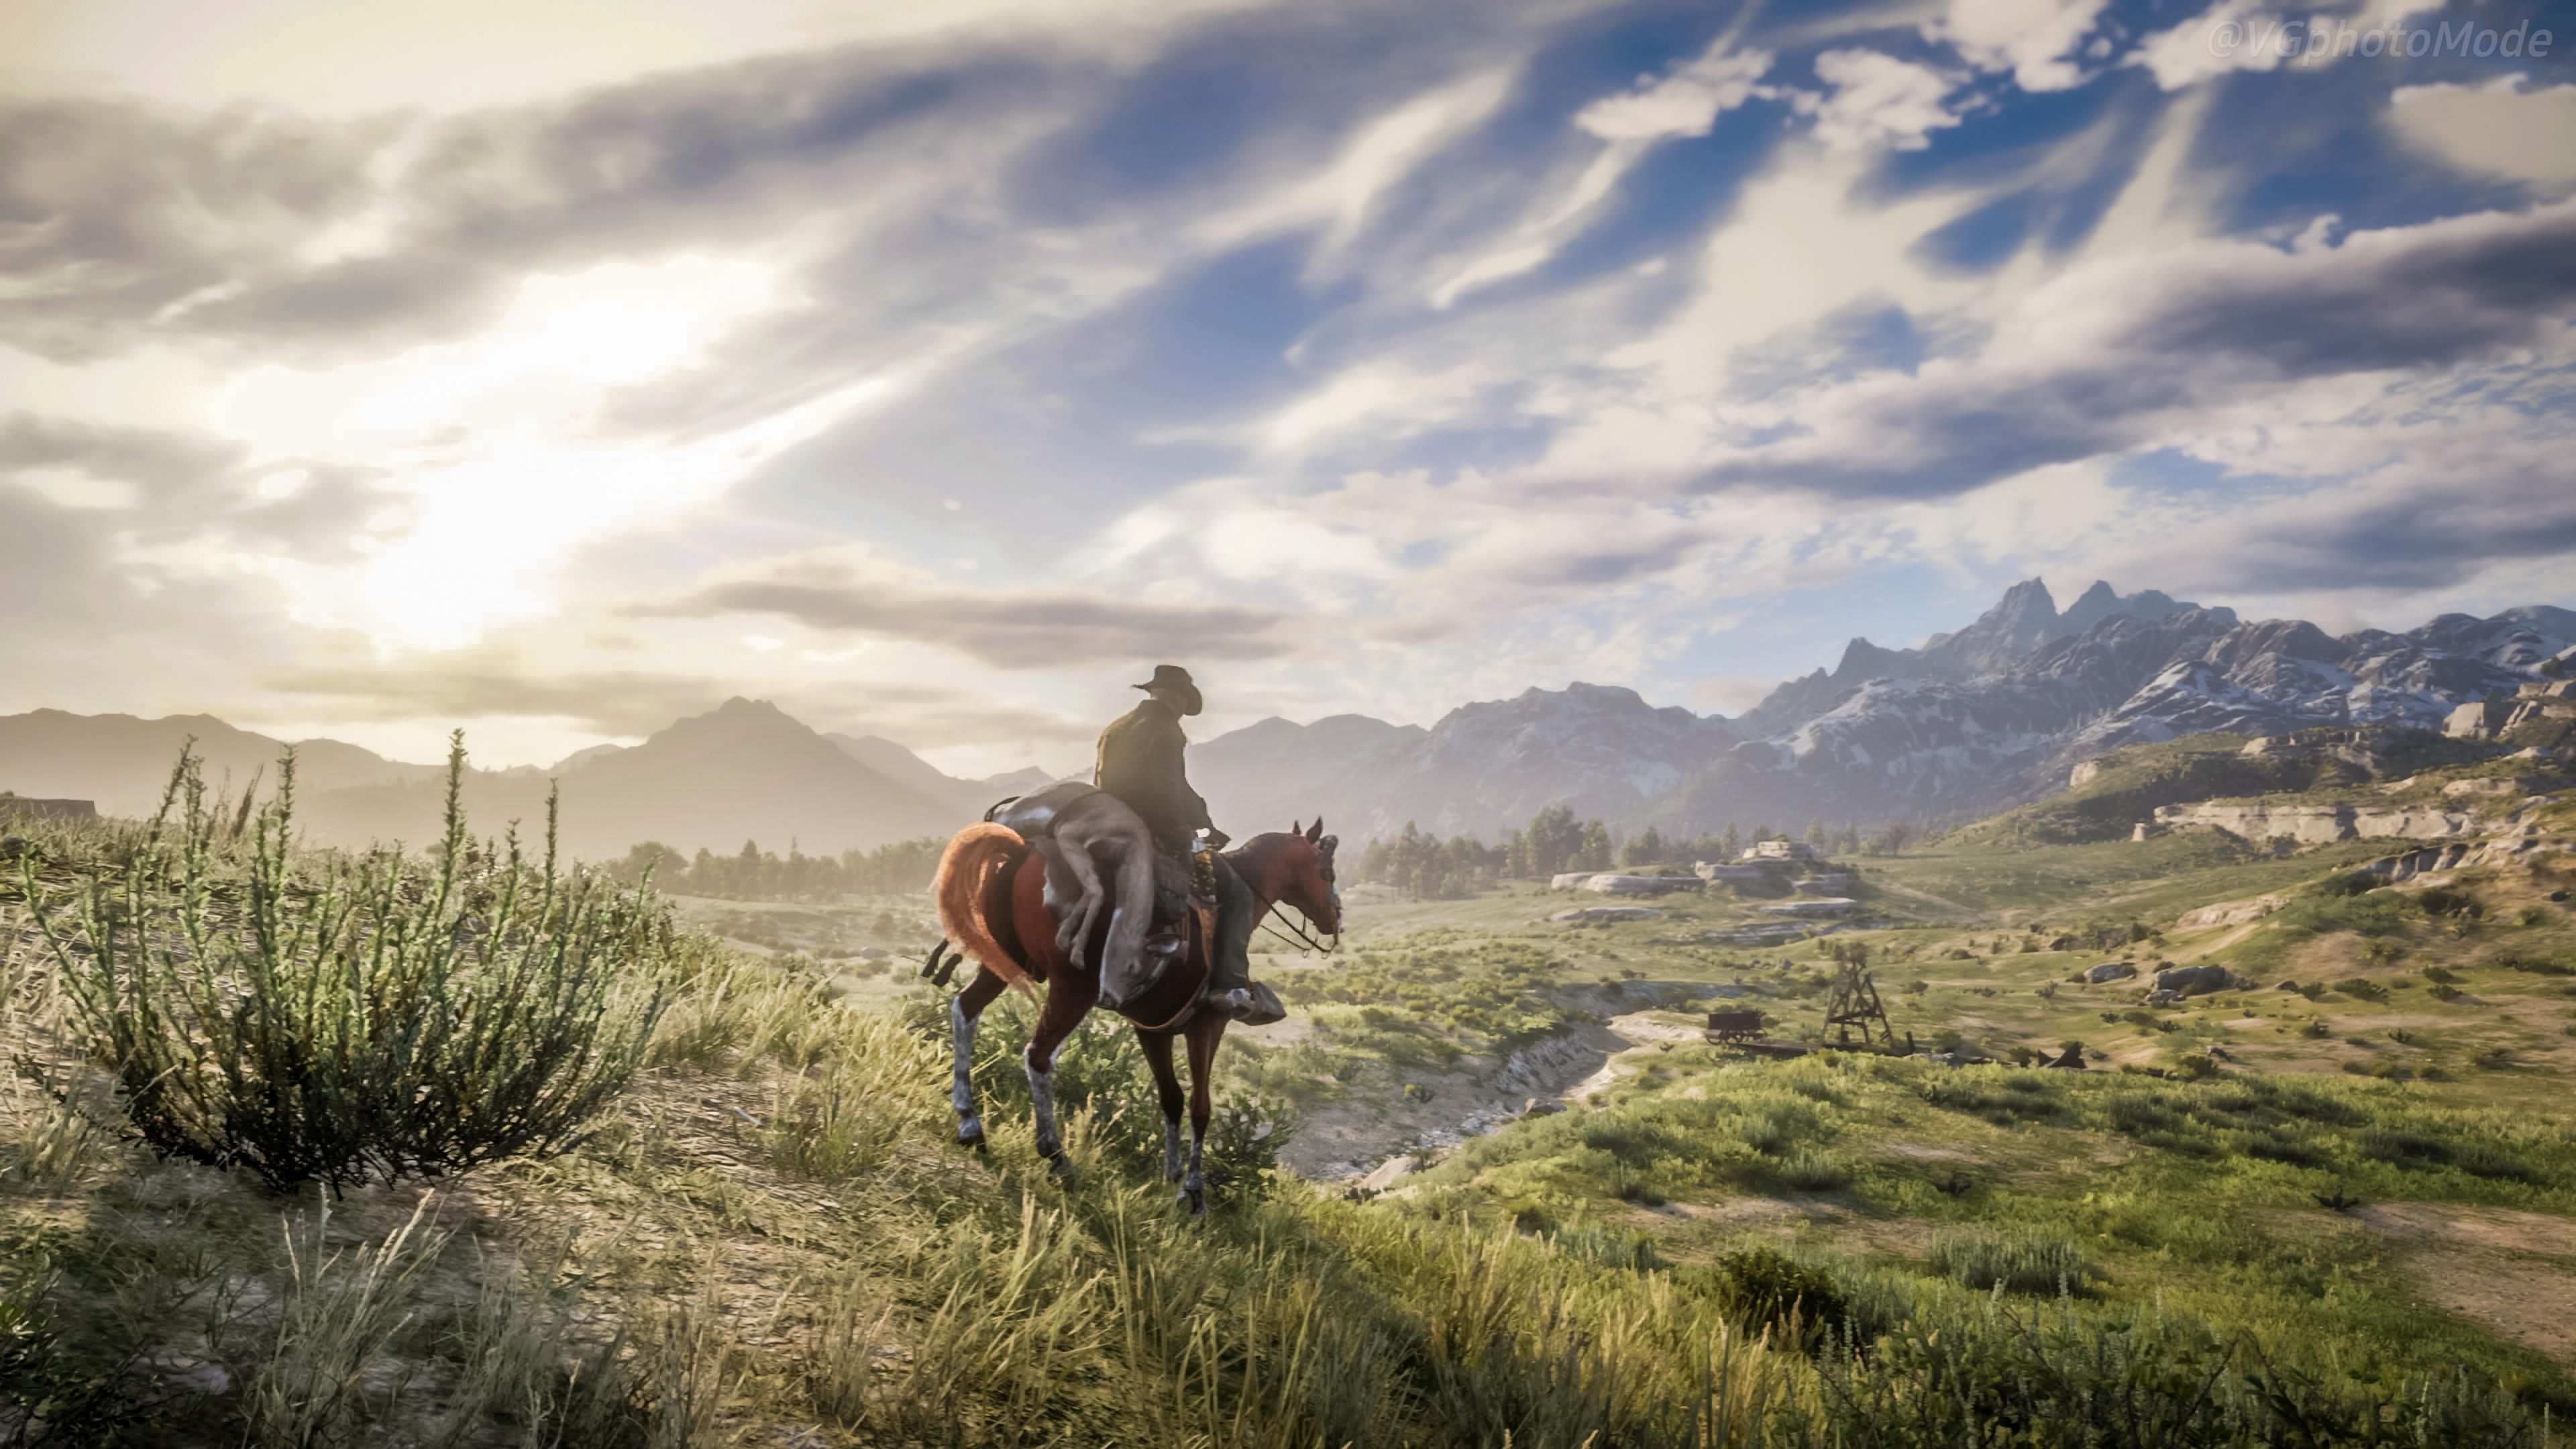 Red Dead Redemption 2 looks better than 99% of current games according to fans